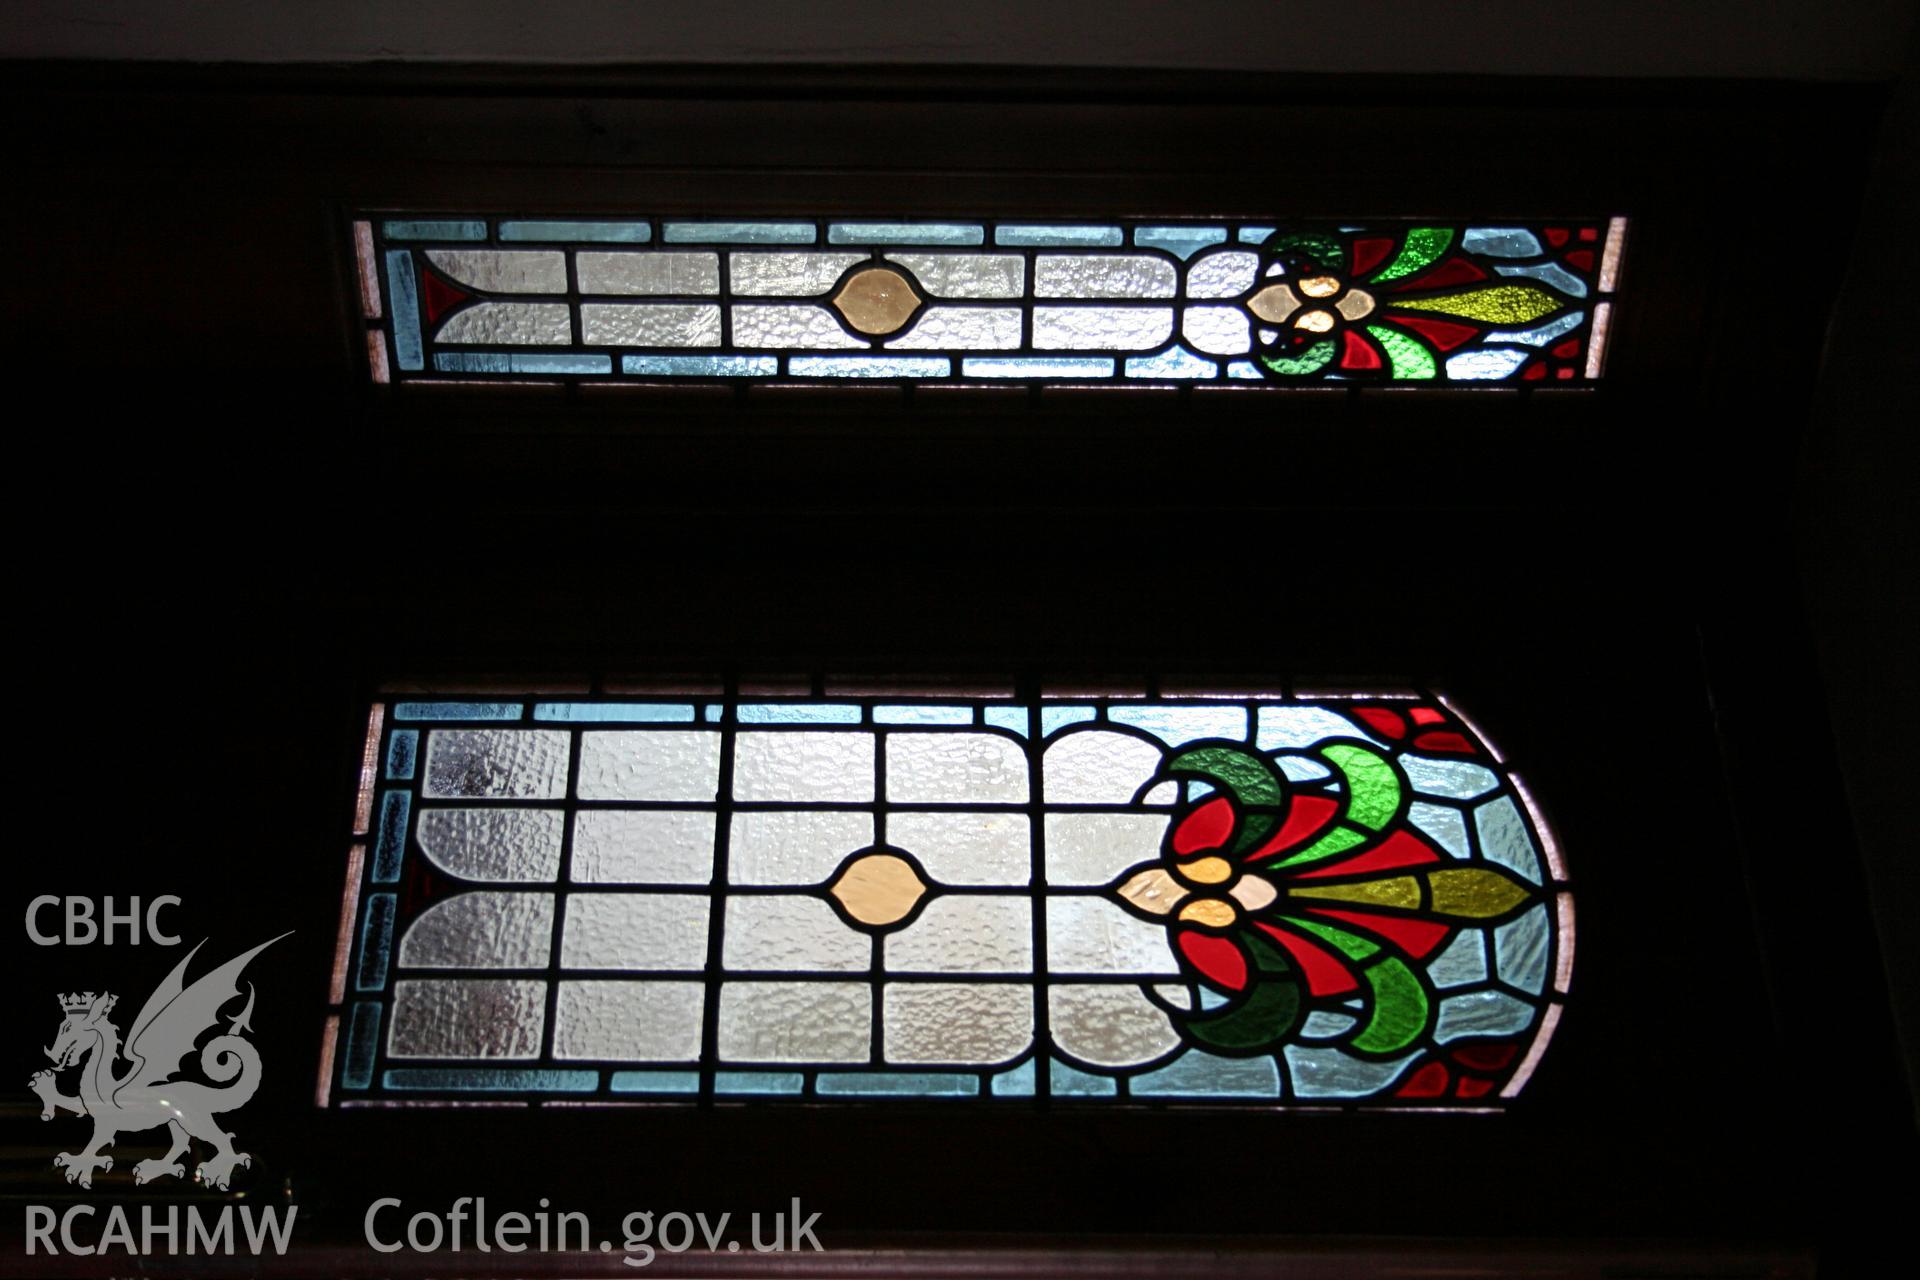 Bethany Chapel, stained glass panels in the doors between the vestibule and main interior.